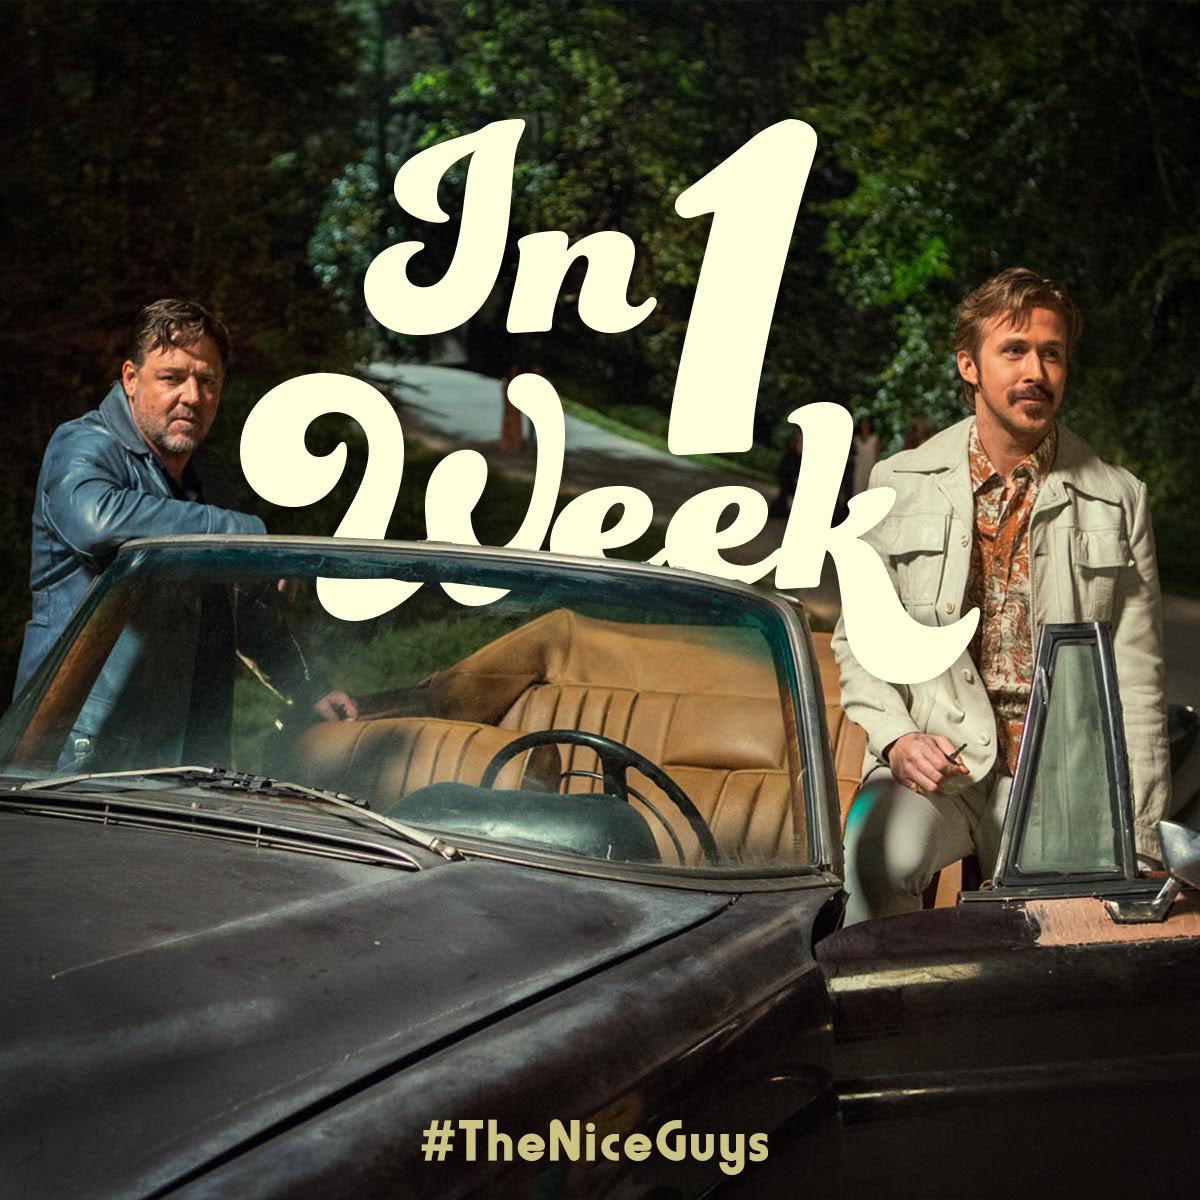 RT @theniceguys: #TheNiceGuys are on the case in one week. Special 7 PM screenings Thursday, May 19, and everywhere Friday May 20. https://…